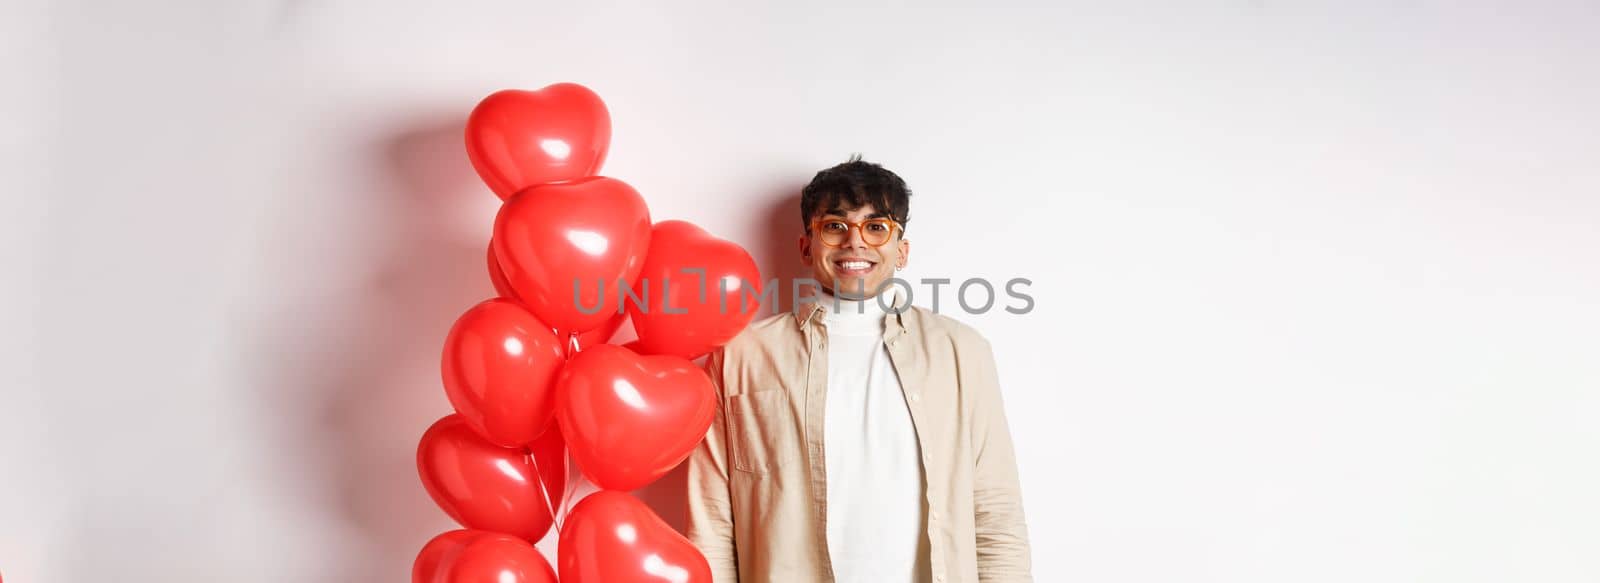 Valentines day. Excited young man smiling, looking hopeful, standing near big red hearts balloons, waiting for true love on lovers date, white background.